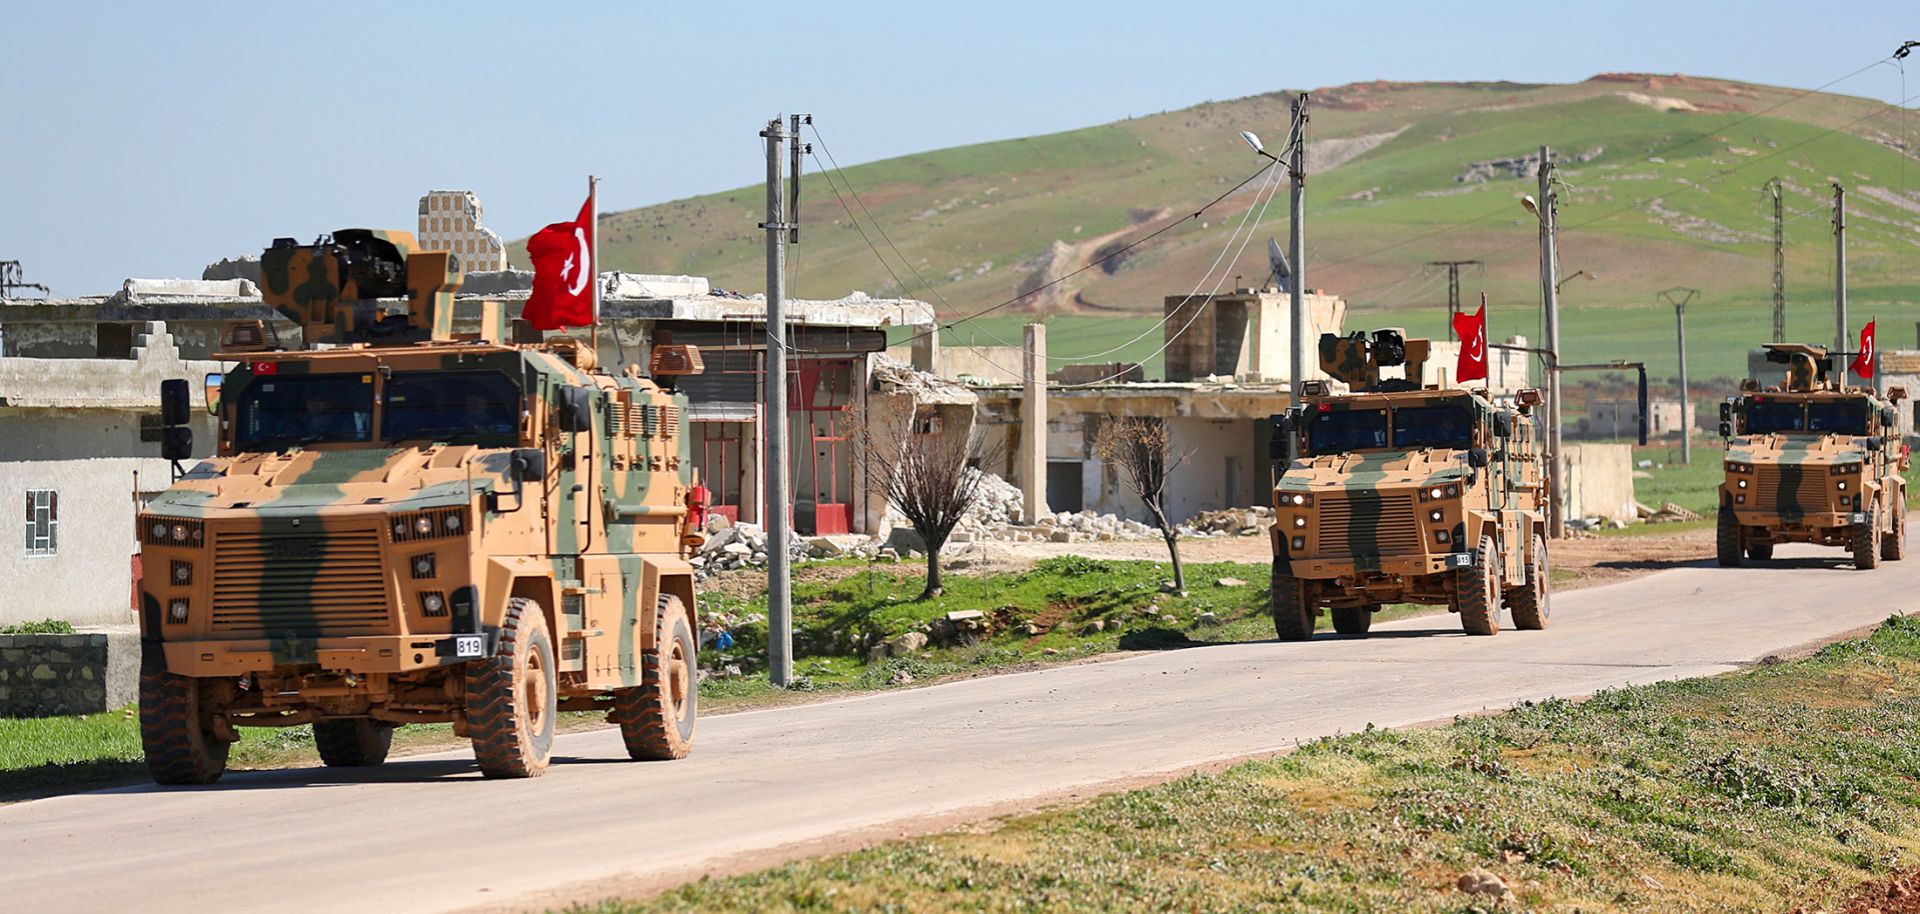 A column of armored Turkish military vehicles proceeds along a road in a demilitarized zone in the western countryside of Syria's Aleppo province on March 8, 2019.